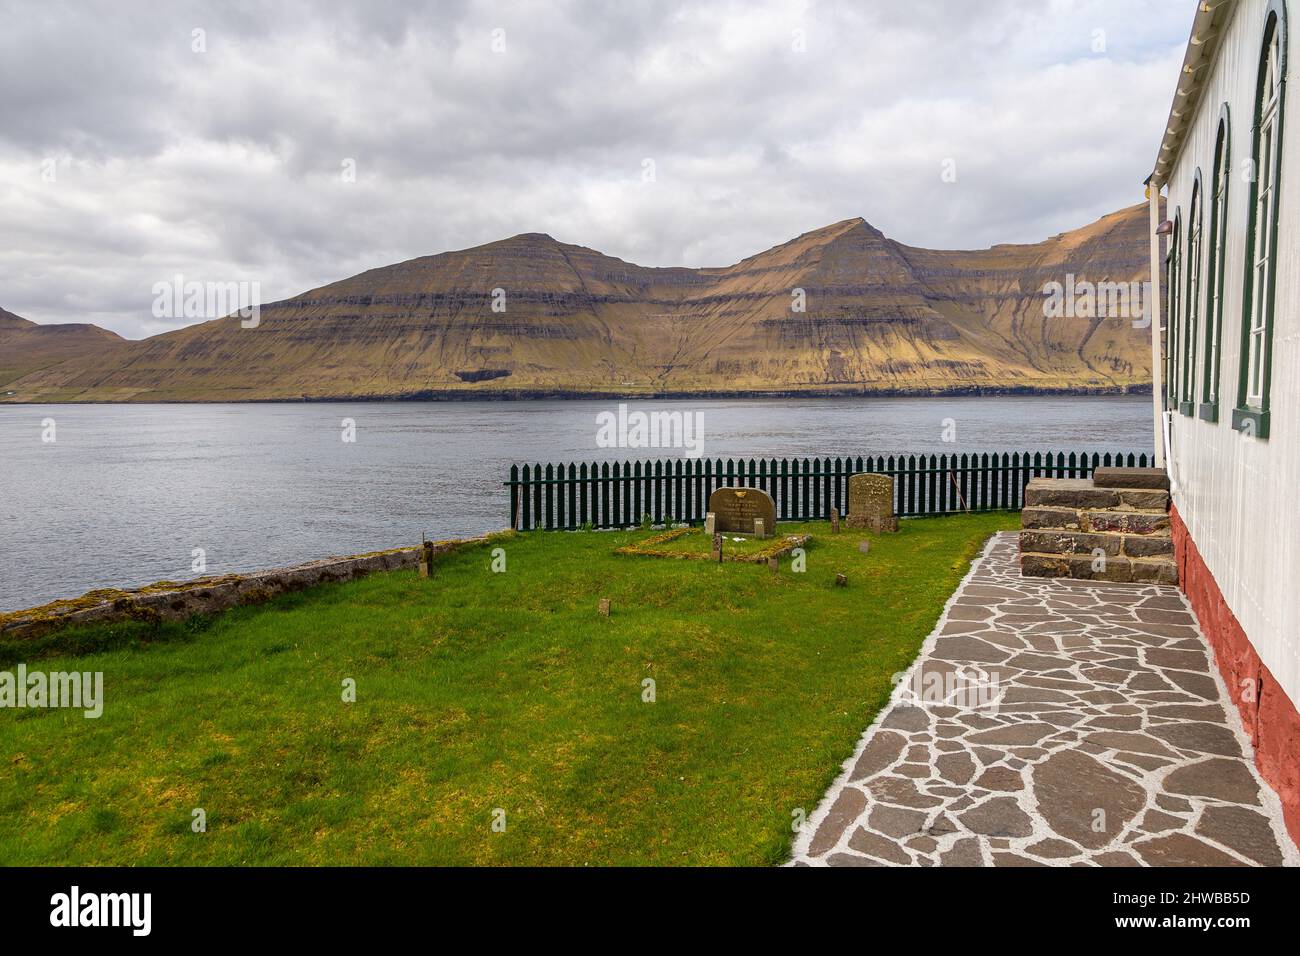 Kunou, Faroe Islands - 02 May 2018: Kunoy Church on a hill. Steep coast of the island of Kalsoy in the background. Stock Photo